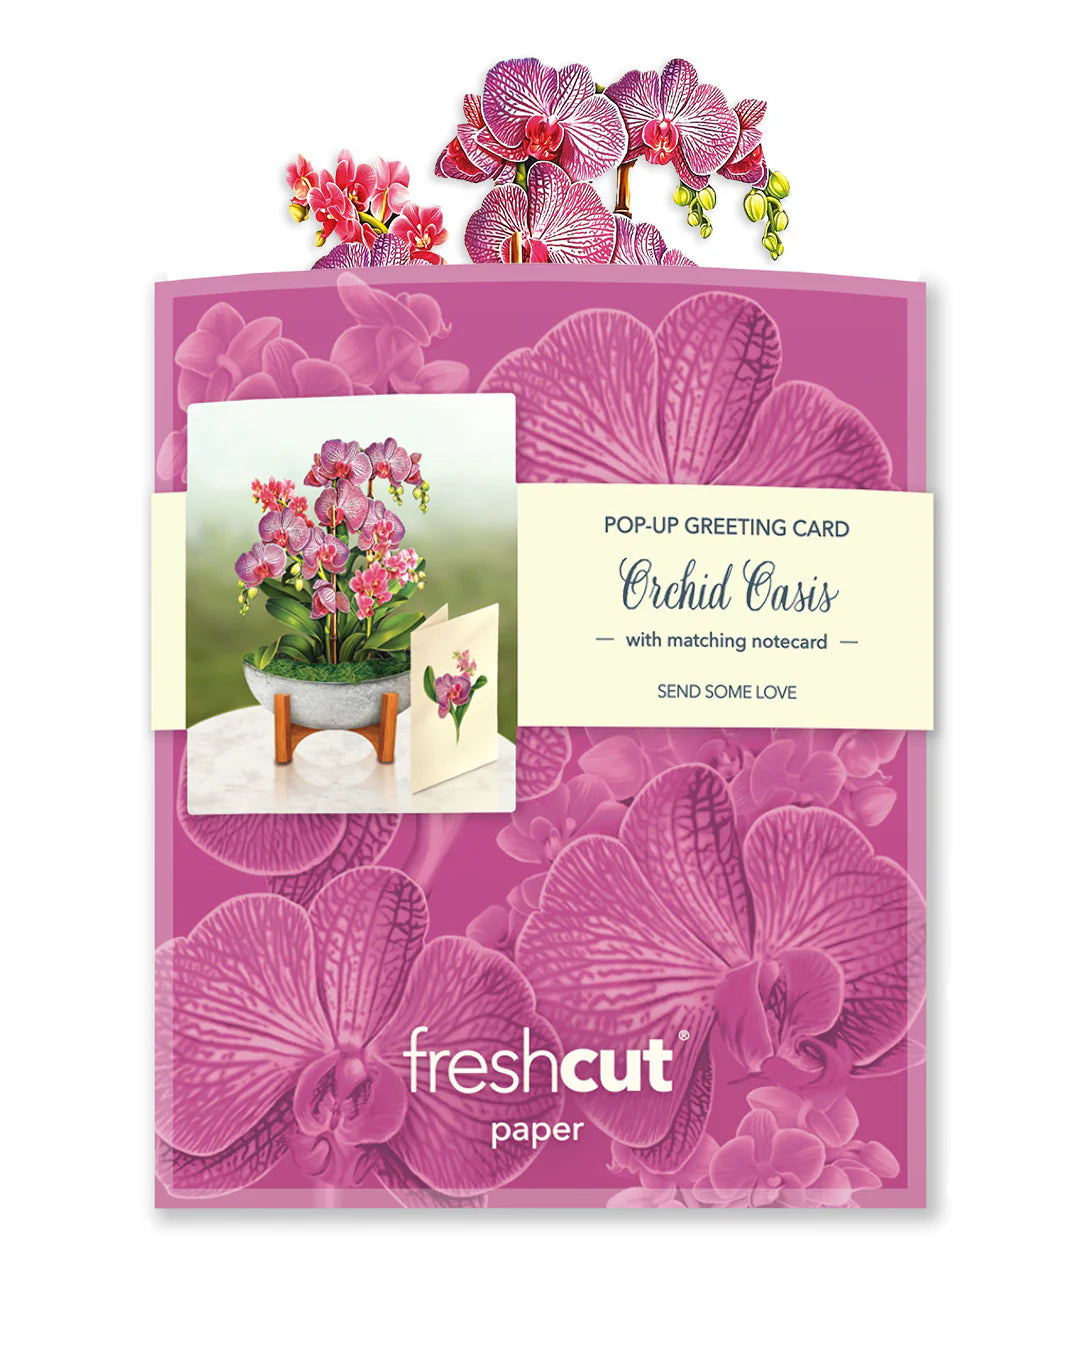 Orchid Oasis bouquet in its mailing envelope.